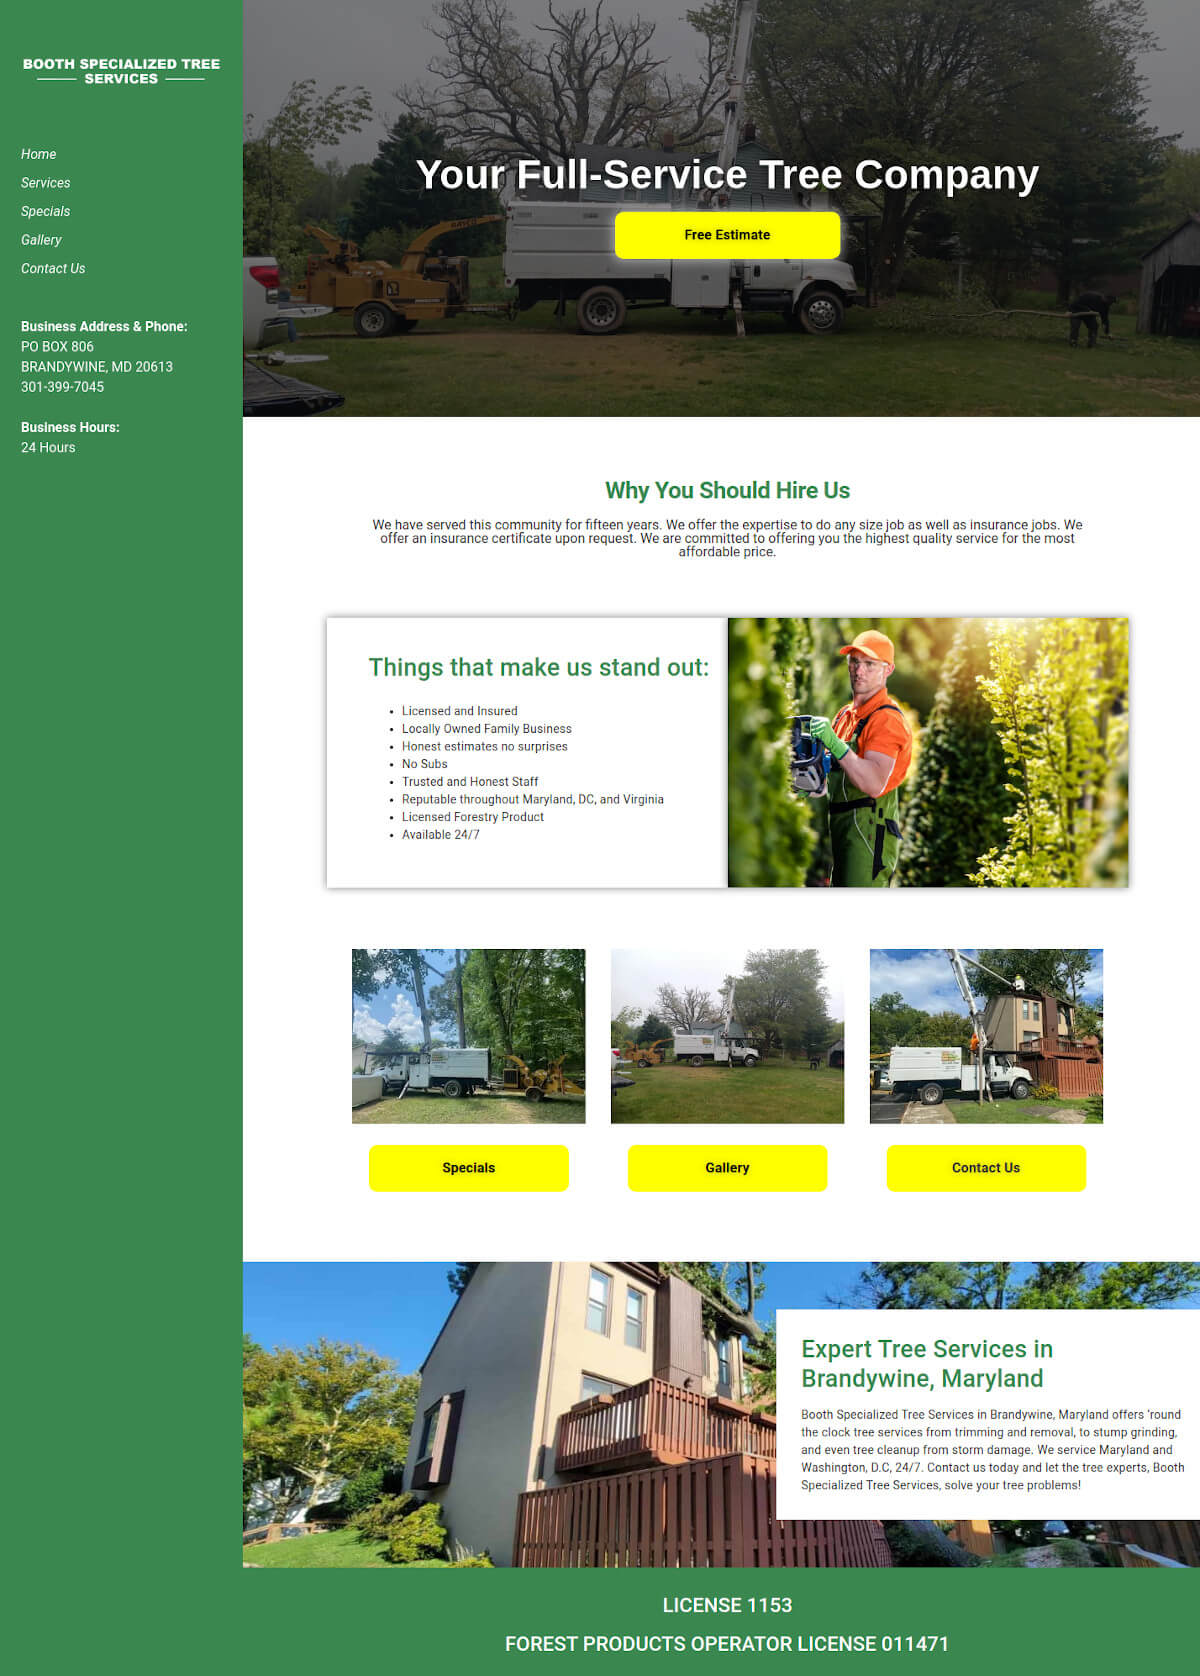 Booth Specialized Tree Services - TLS Mobile Friendly Website